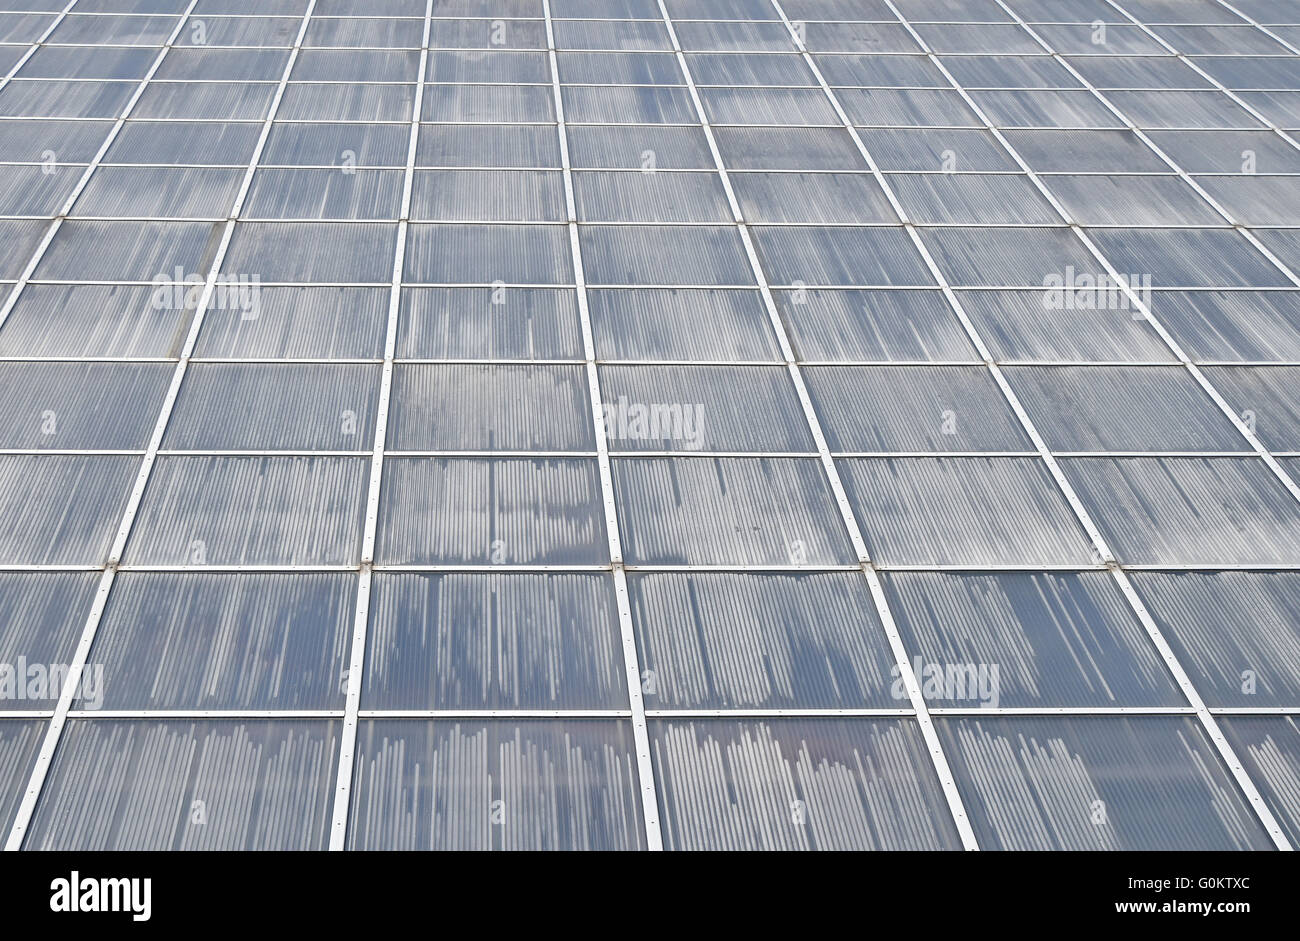 Greenhouse plastic glass framed wall of windows fog up surface in perspective Stock Photo